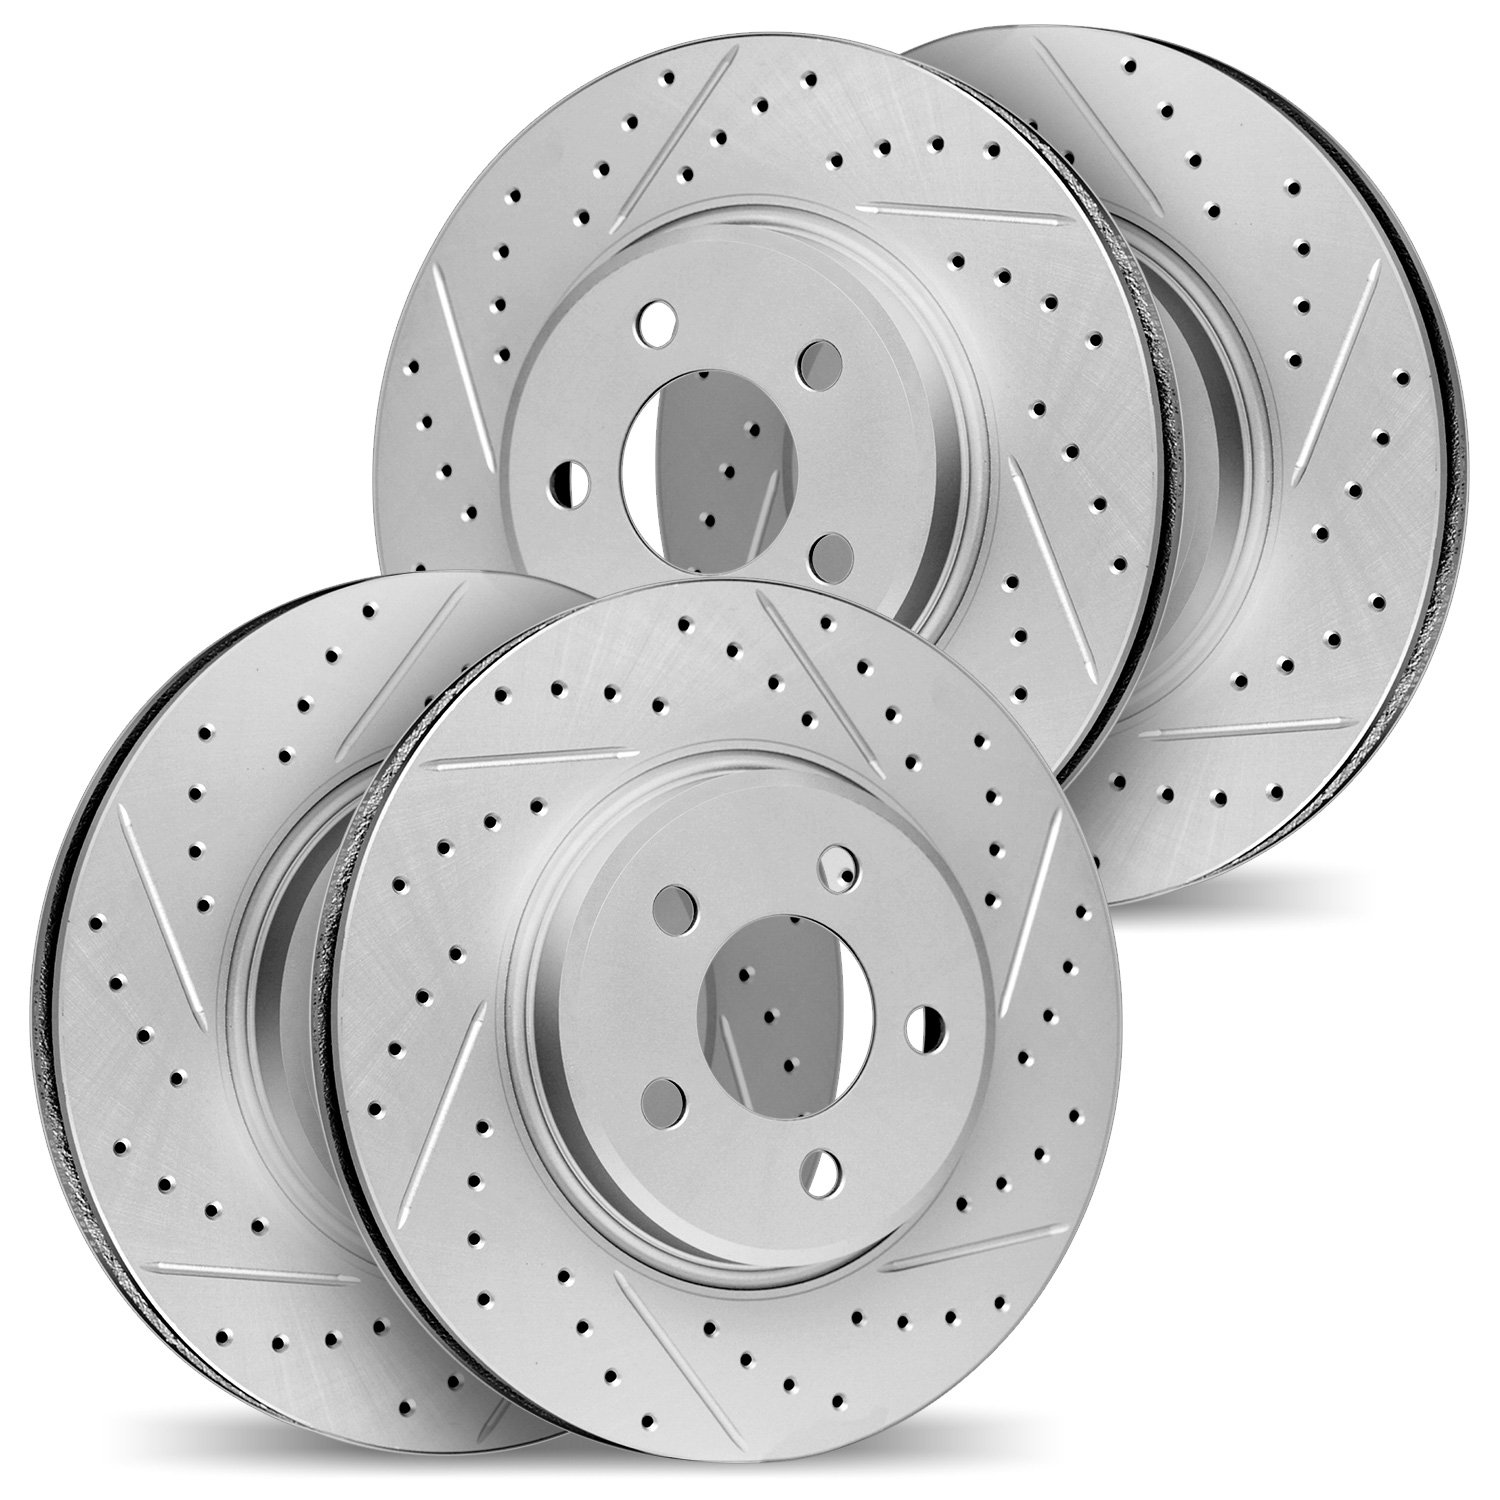 2004-39006 Geoperformance Drilled/Slotted Brake Rotors, Fits Select Mopar, Position: Front and Rear